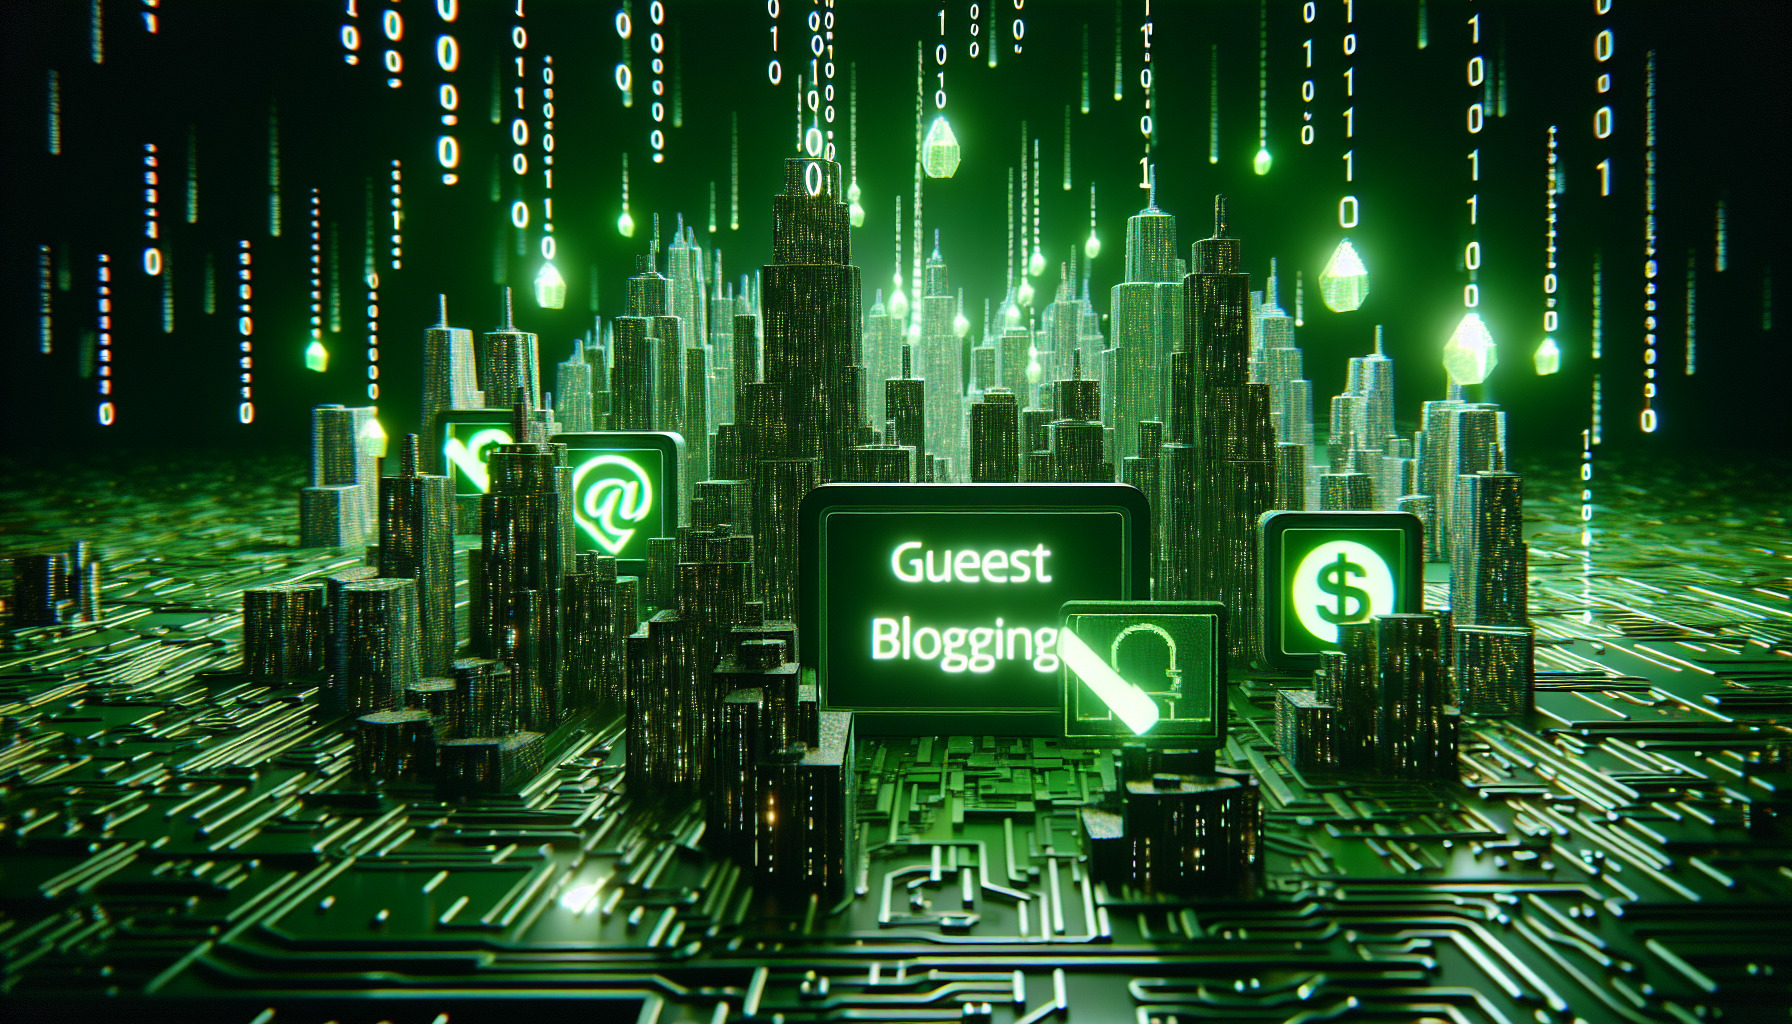 Use guest blogging effectively to build quality backlinks and boost your site's SEO performance.